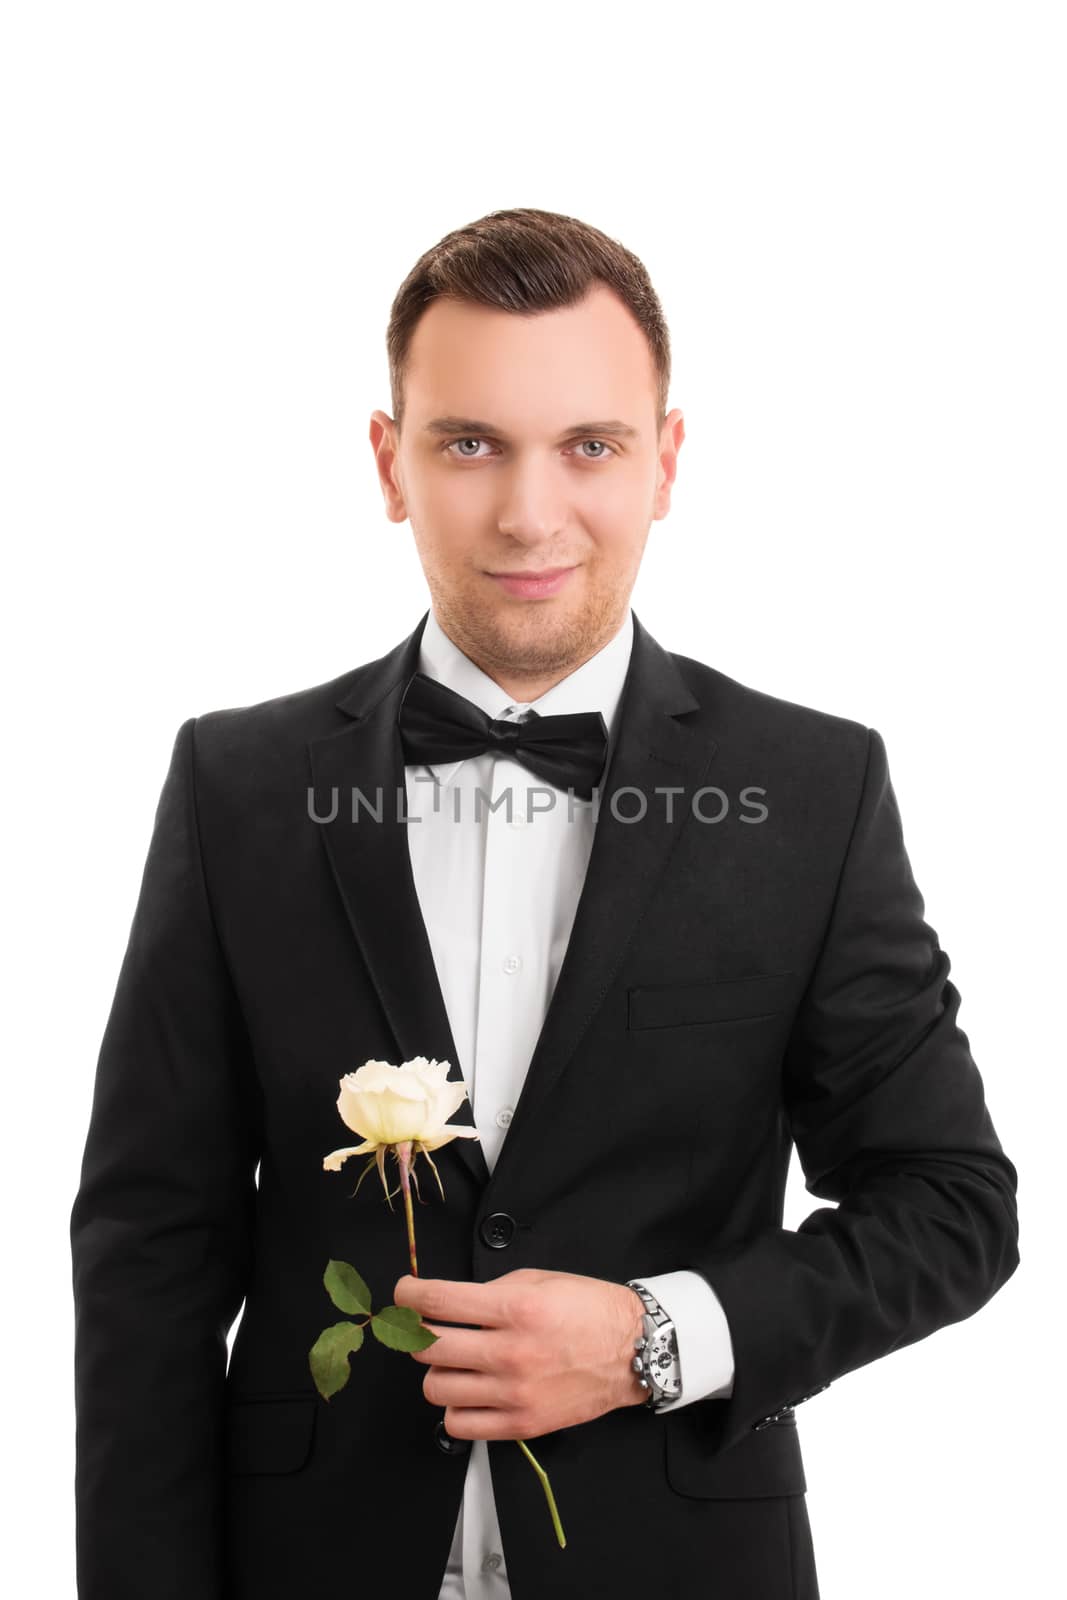 A portrait of a smiling handsome young man in a suit holding a flower, isolated on white background.